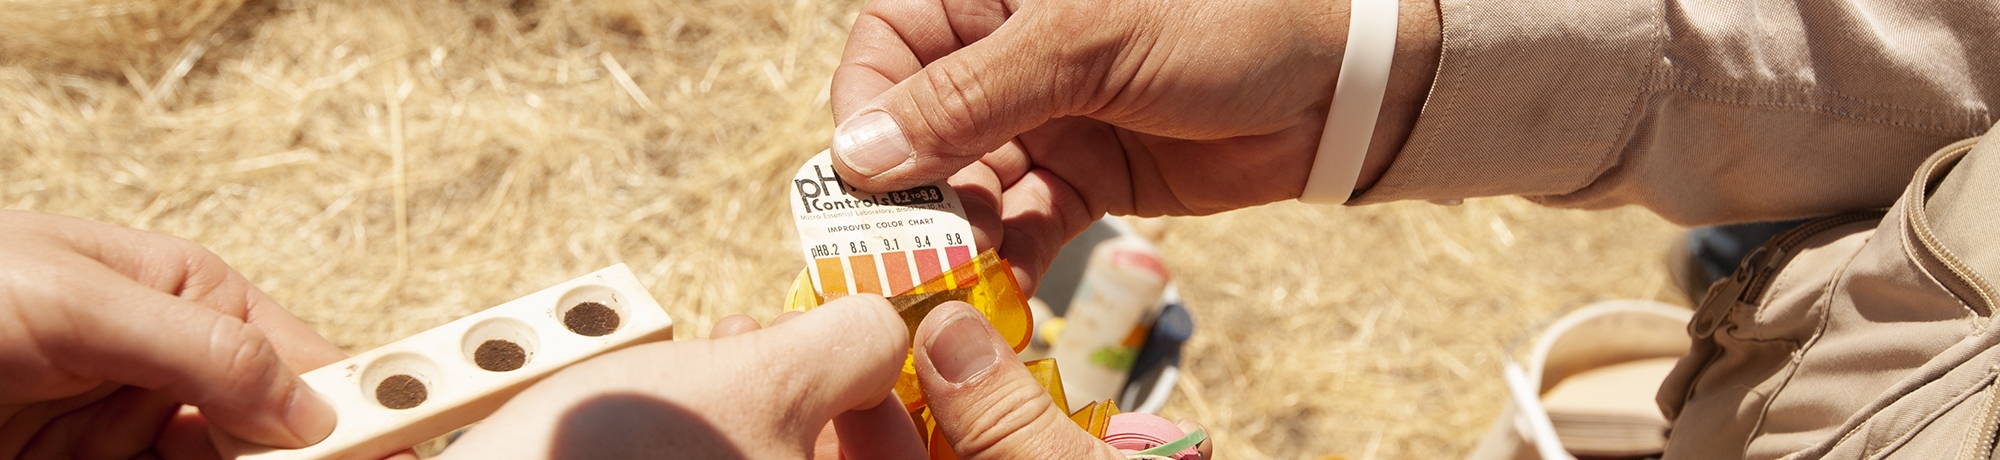 hands holding a ph testing kit